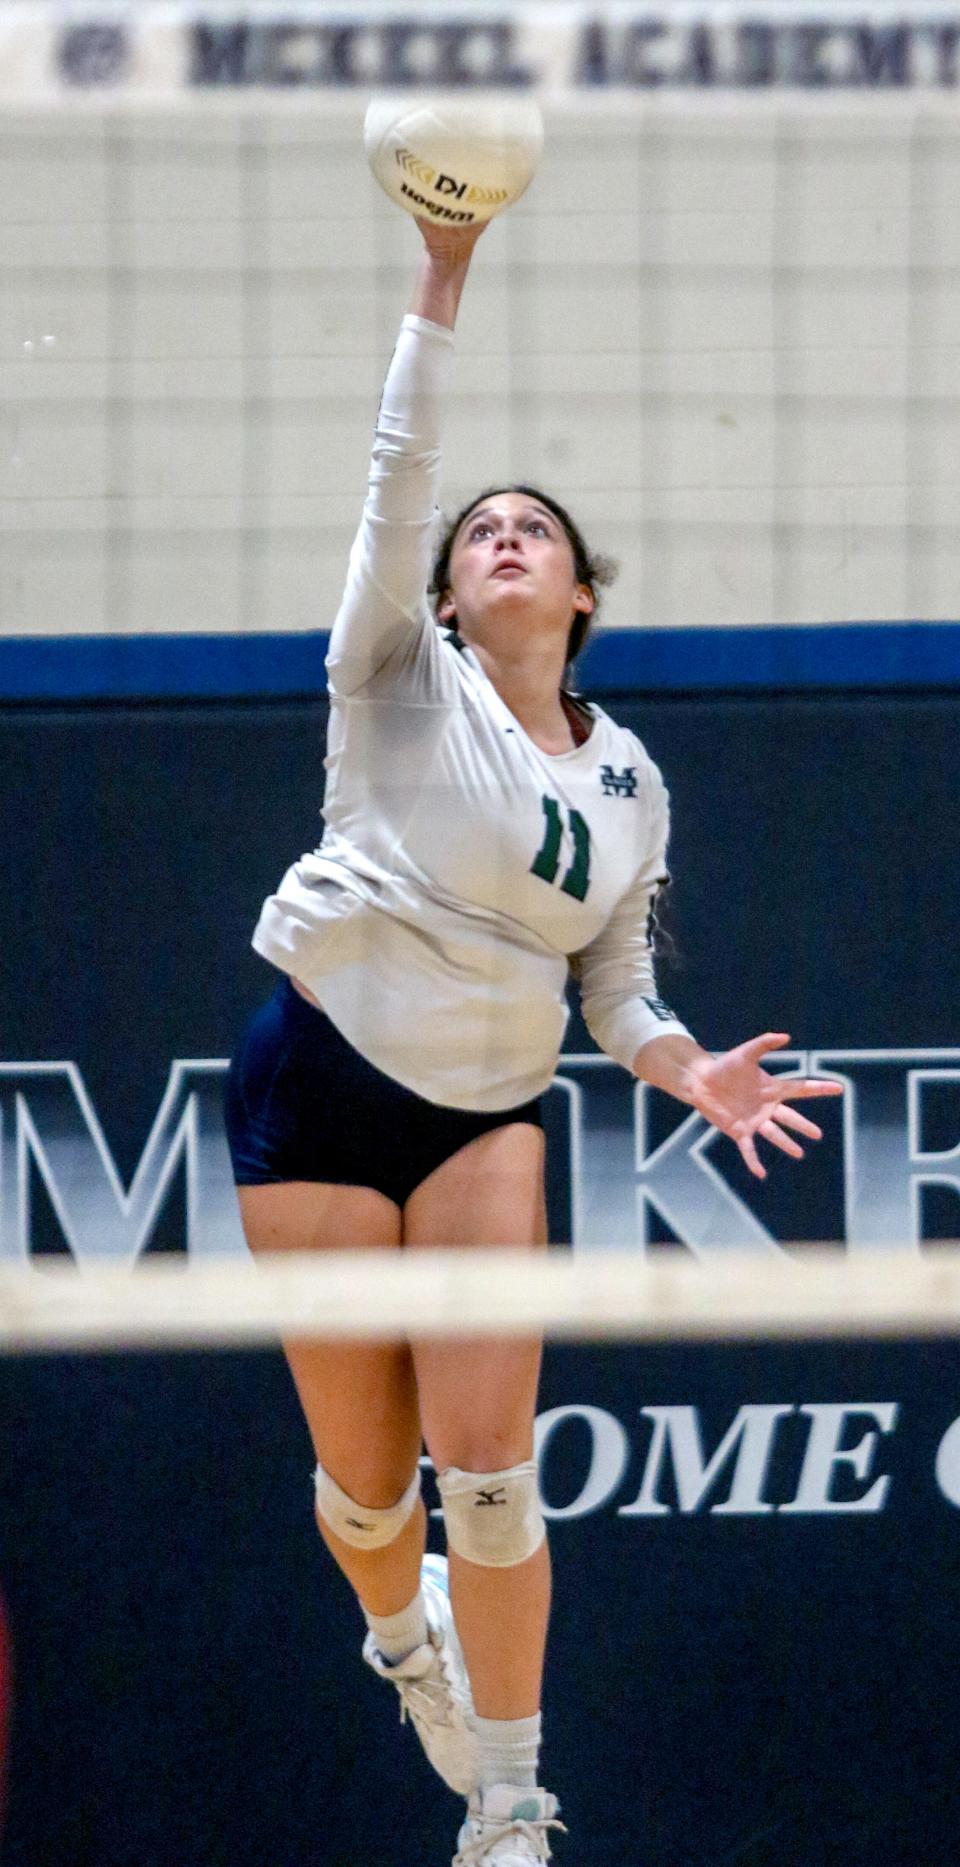 McKeel's Juleigh Urbina puts up a serve against Discovery in the Class 4A, District 8 semifinals.